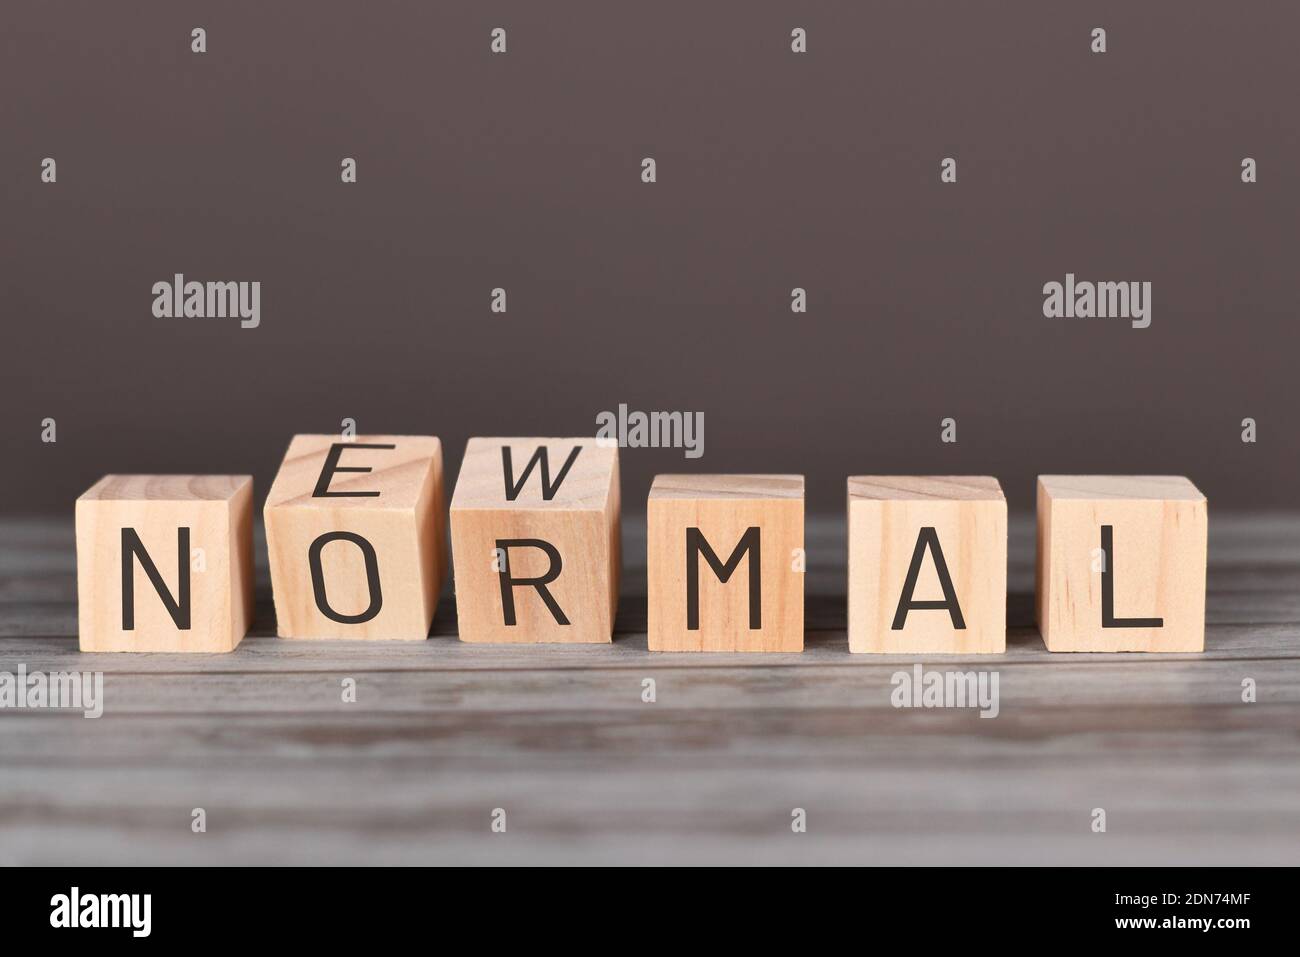 Wooden blocks with letters forming words 'New Normal' Stock Photo